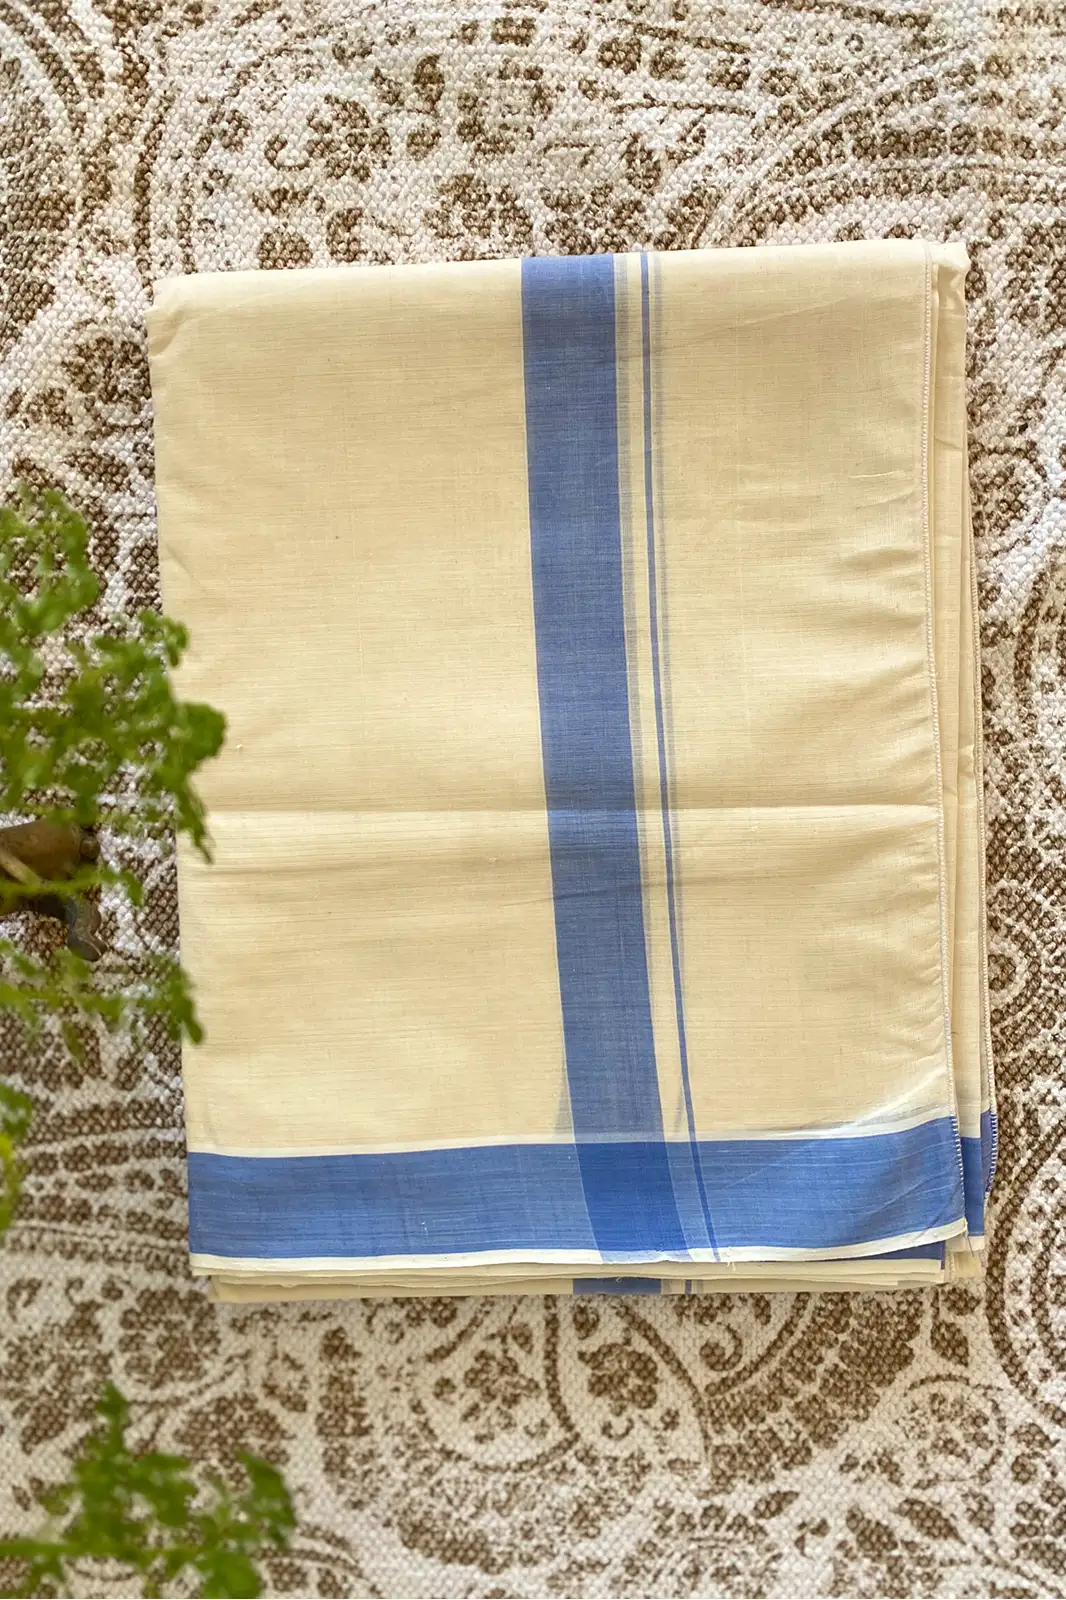 sodoau natural cotton dhoti, organic cotton dhoti, readymade dhoti price, indian traditional clothes shop, sustainable clothing brand, white cotton dhoti online, cotton silk dhoti, best cotton dhoti, cotton white dhoti, pure cotton dhoti price, mens dhoti kurta set, handloom cotton dhoti price, printed dhoti pants, dhoti traditional, organic cotton dhoti, readymade dhoti price, Indian traditional clothes, indian traditional clothes shop, sustainable clothing brand, handwoven men clothing, handmade men clothing store, sepia stories, eco-friendly clothing store